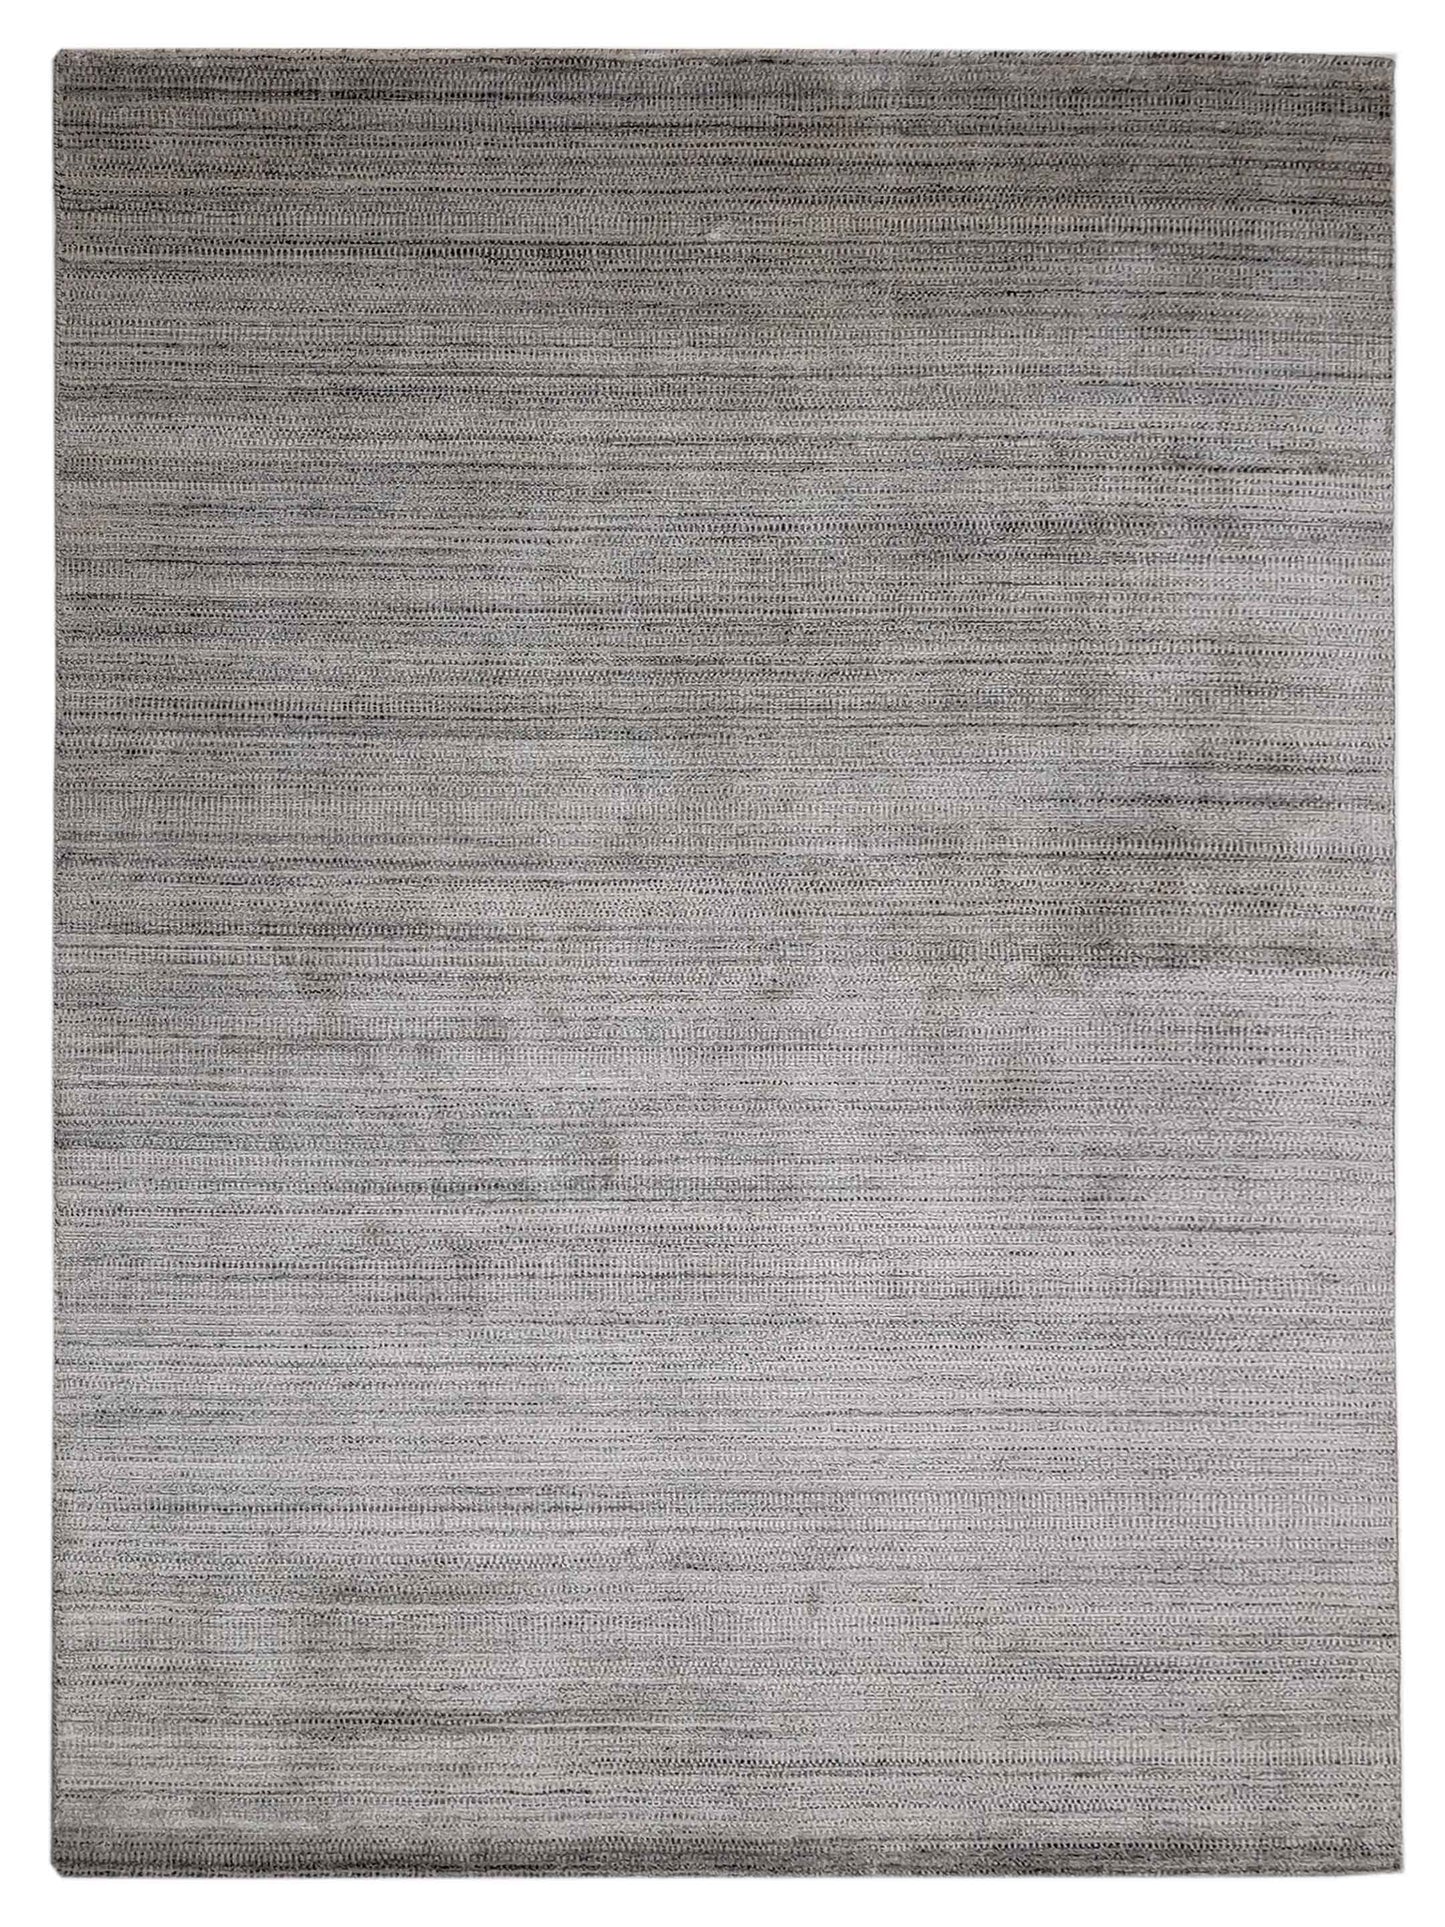 Artisan Heather  Orchid Silver Transitional Loom Rug